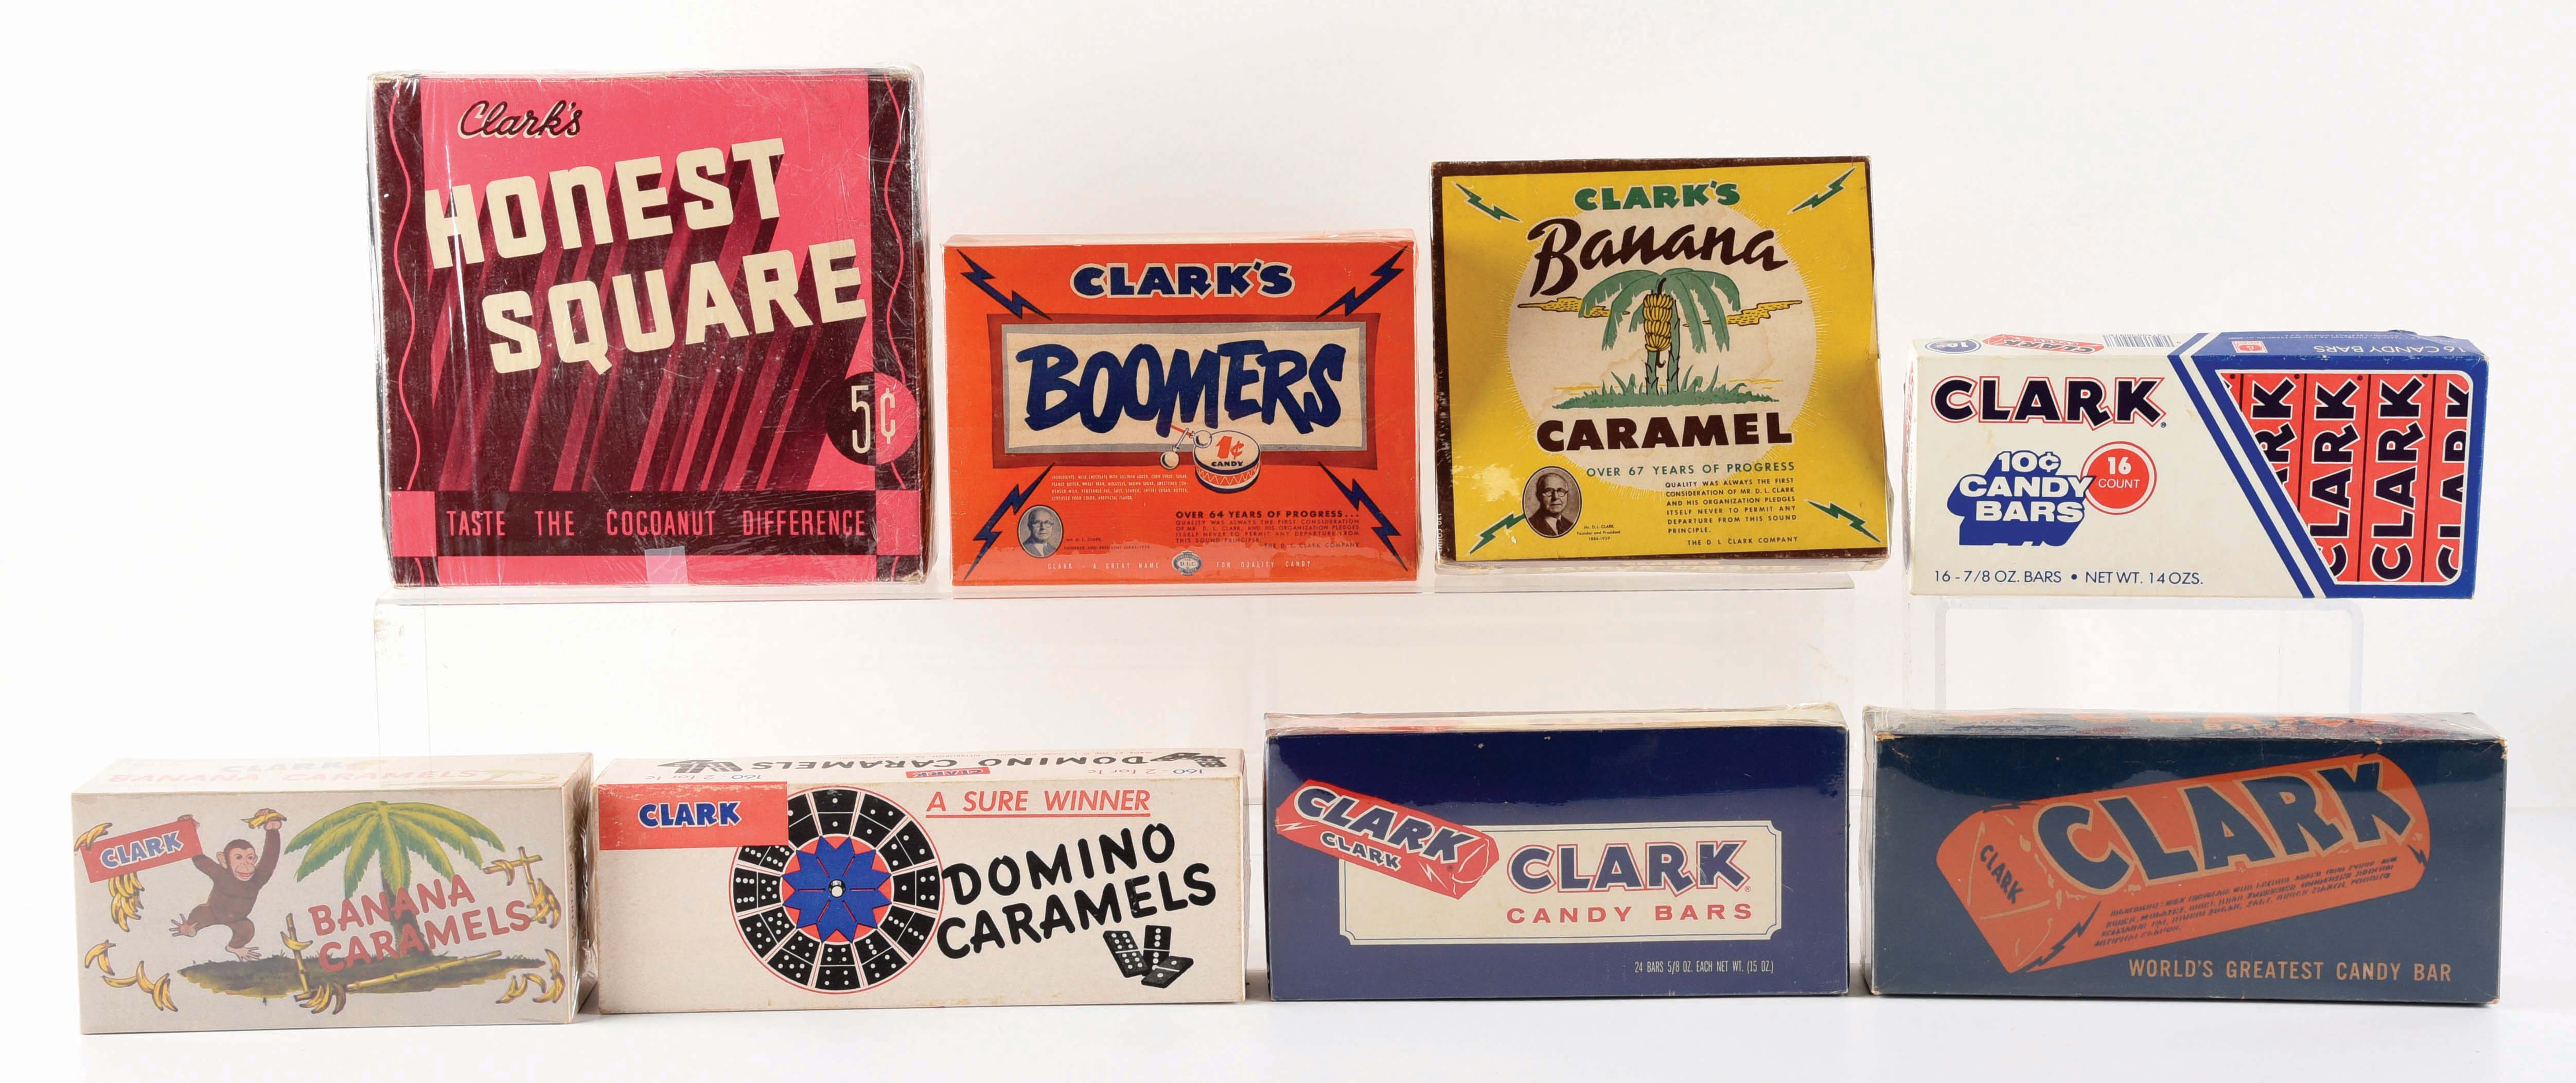 lot-detail-lot-of-8-clark-s-candy-bar-boxes